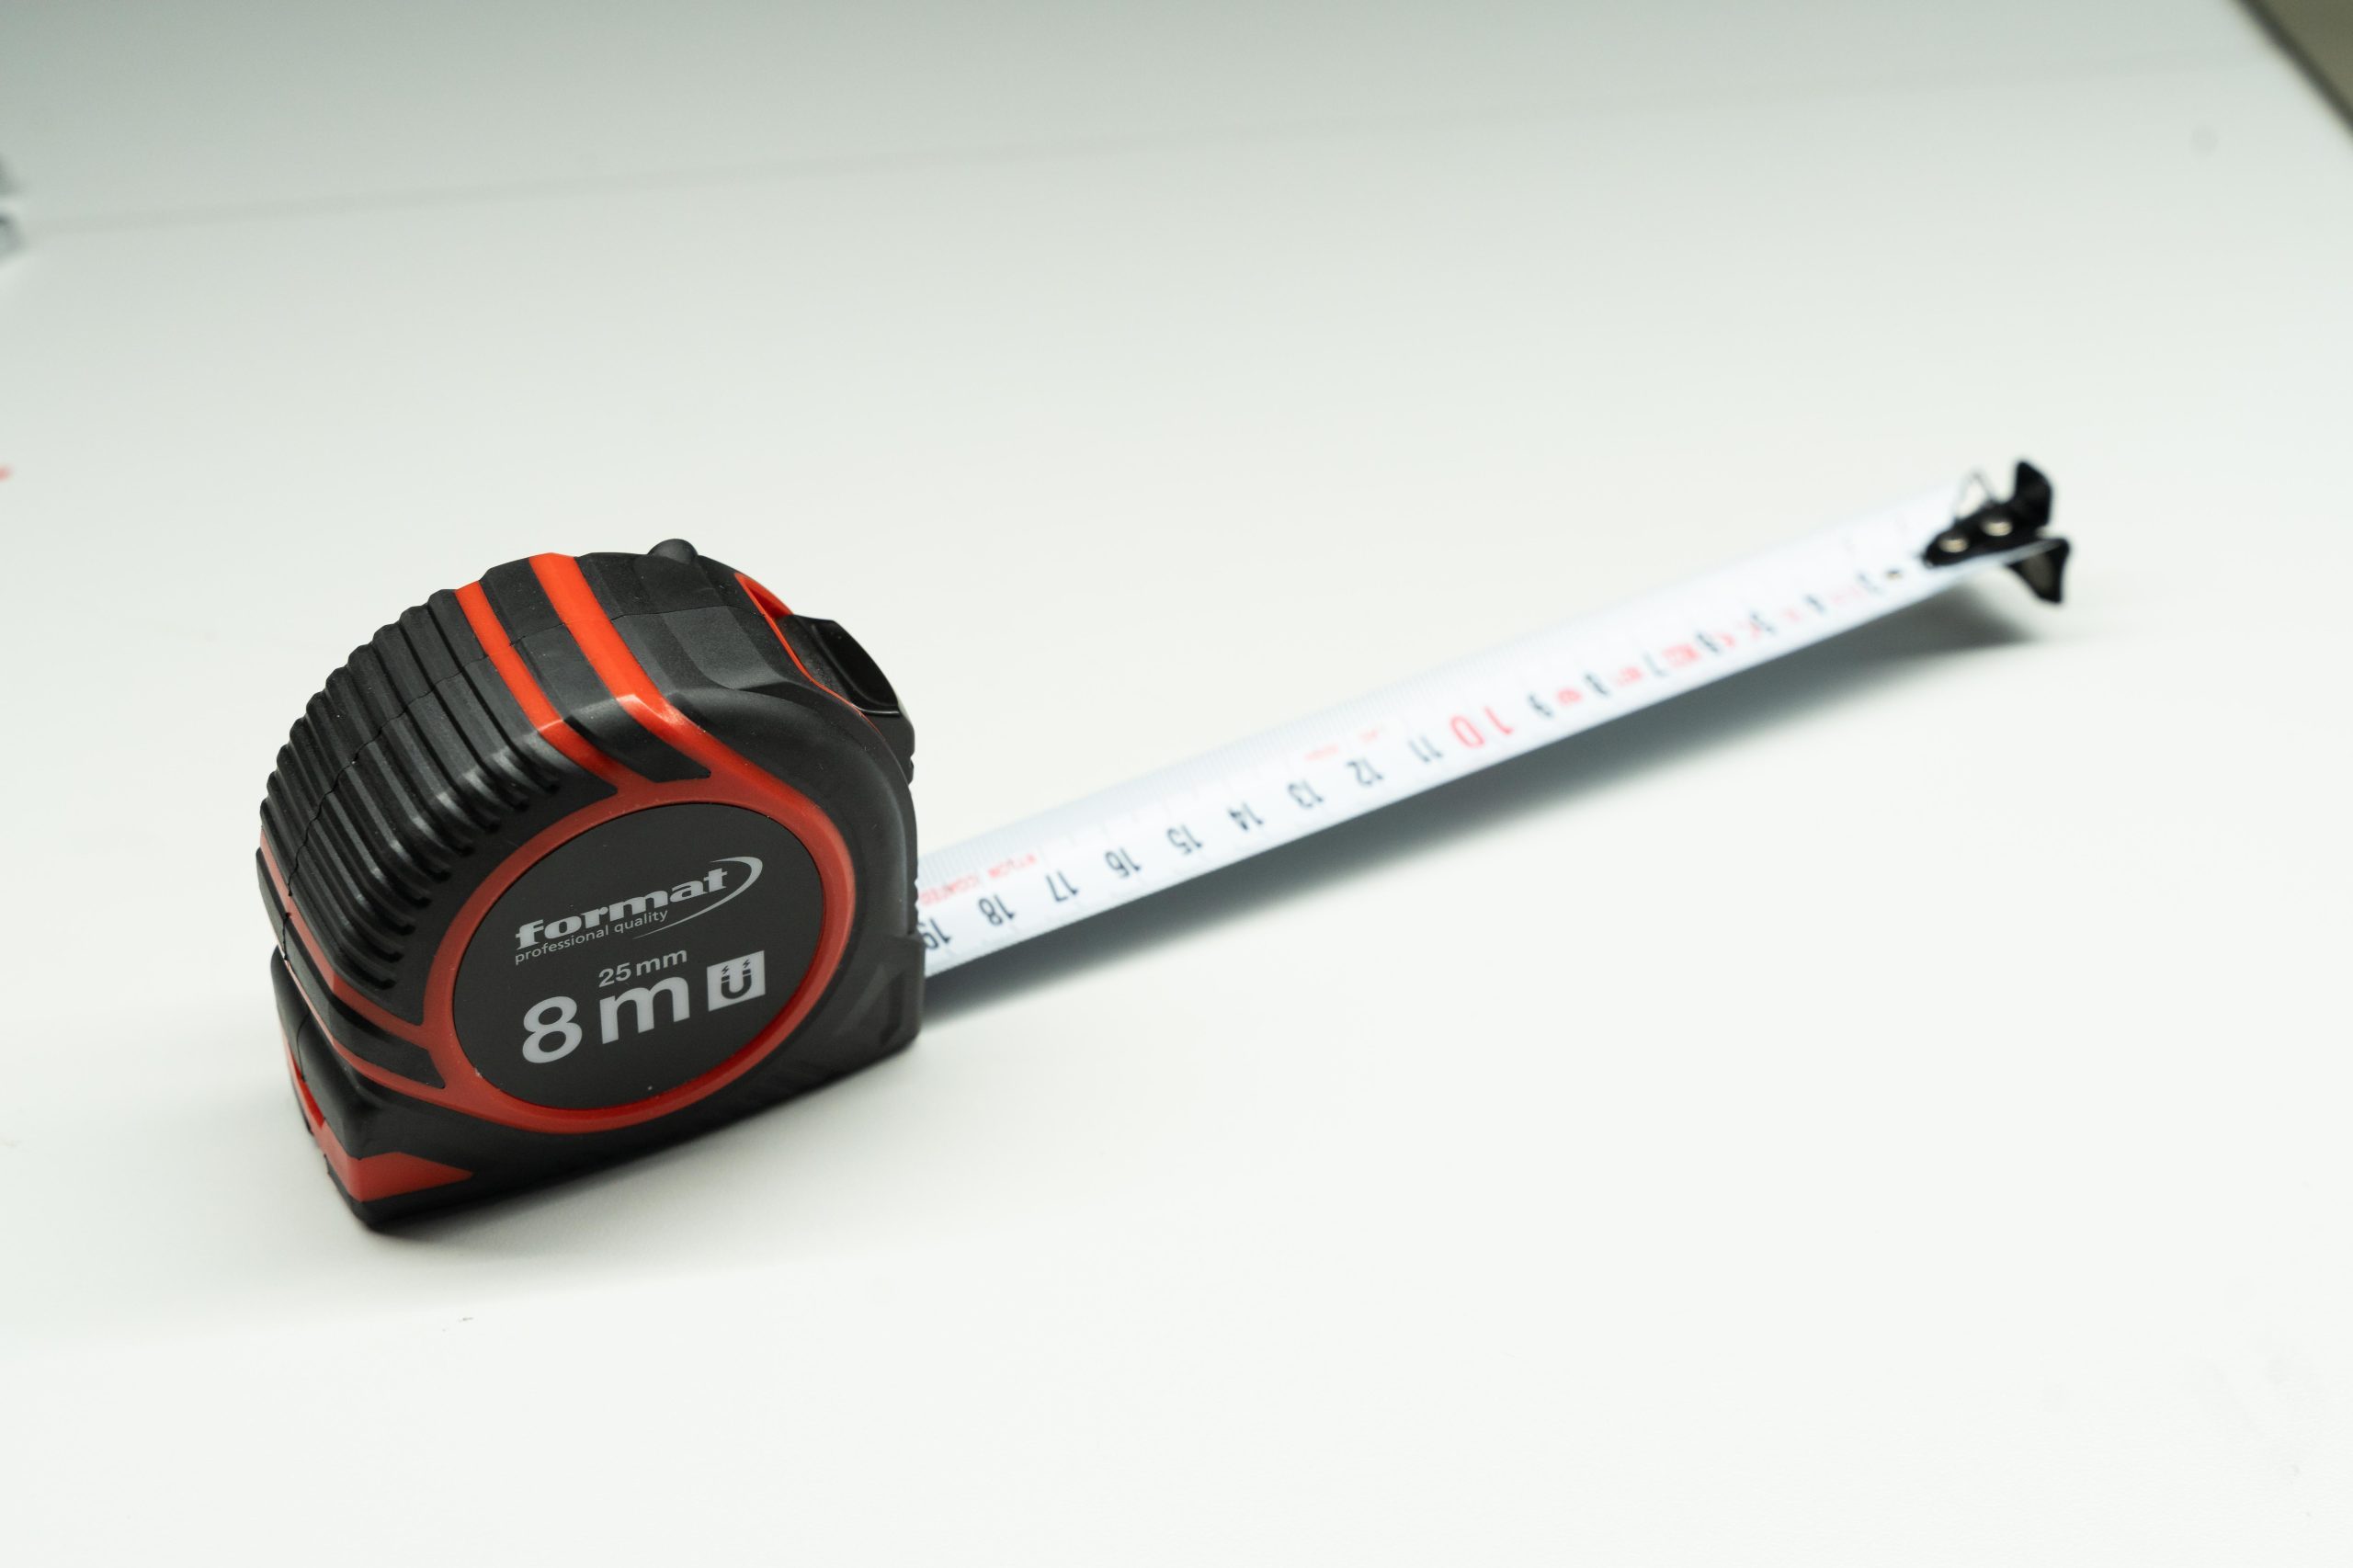 FORMAT pocket tape measure with magnet on the start fitting